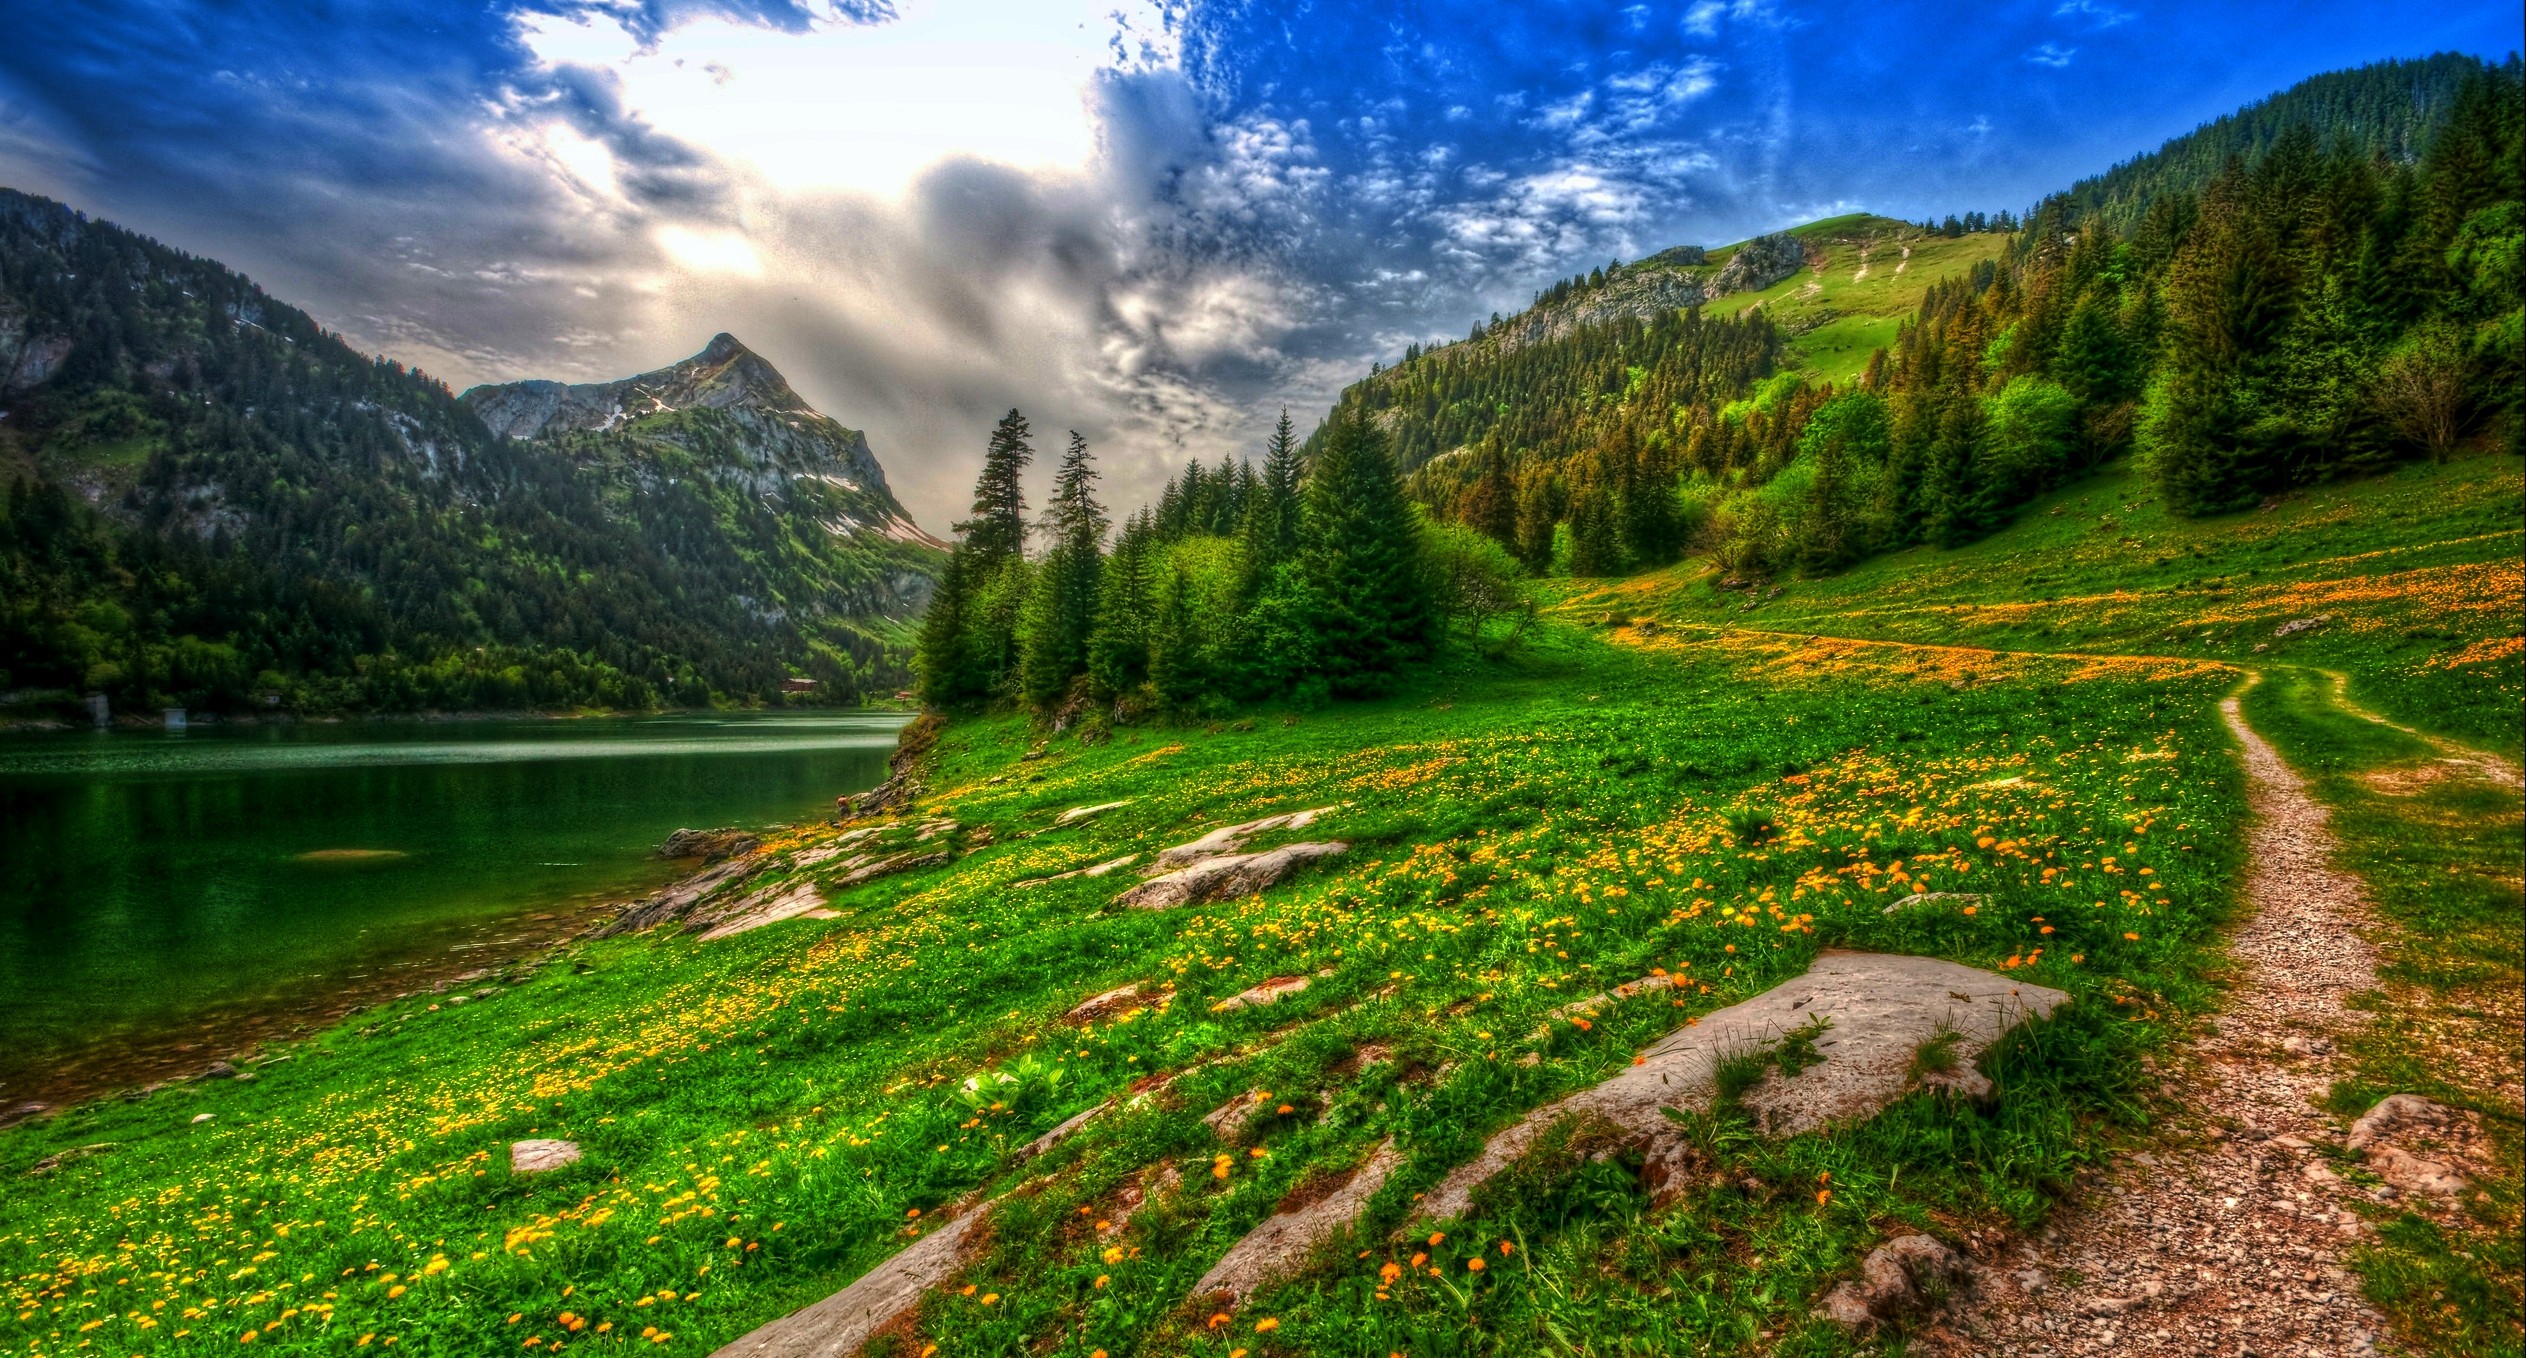 General 2526x1358 nature landscape lake mountains forest wildflowers spring pine trees path Switzerland HDR